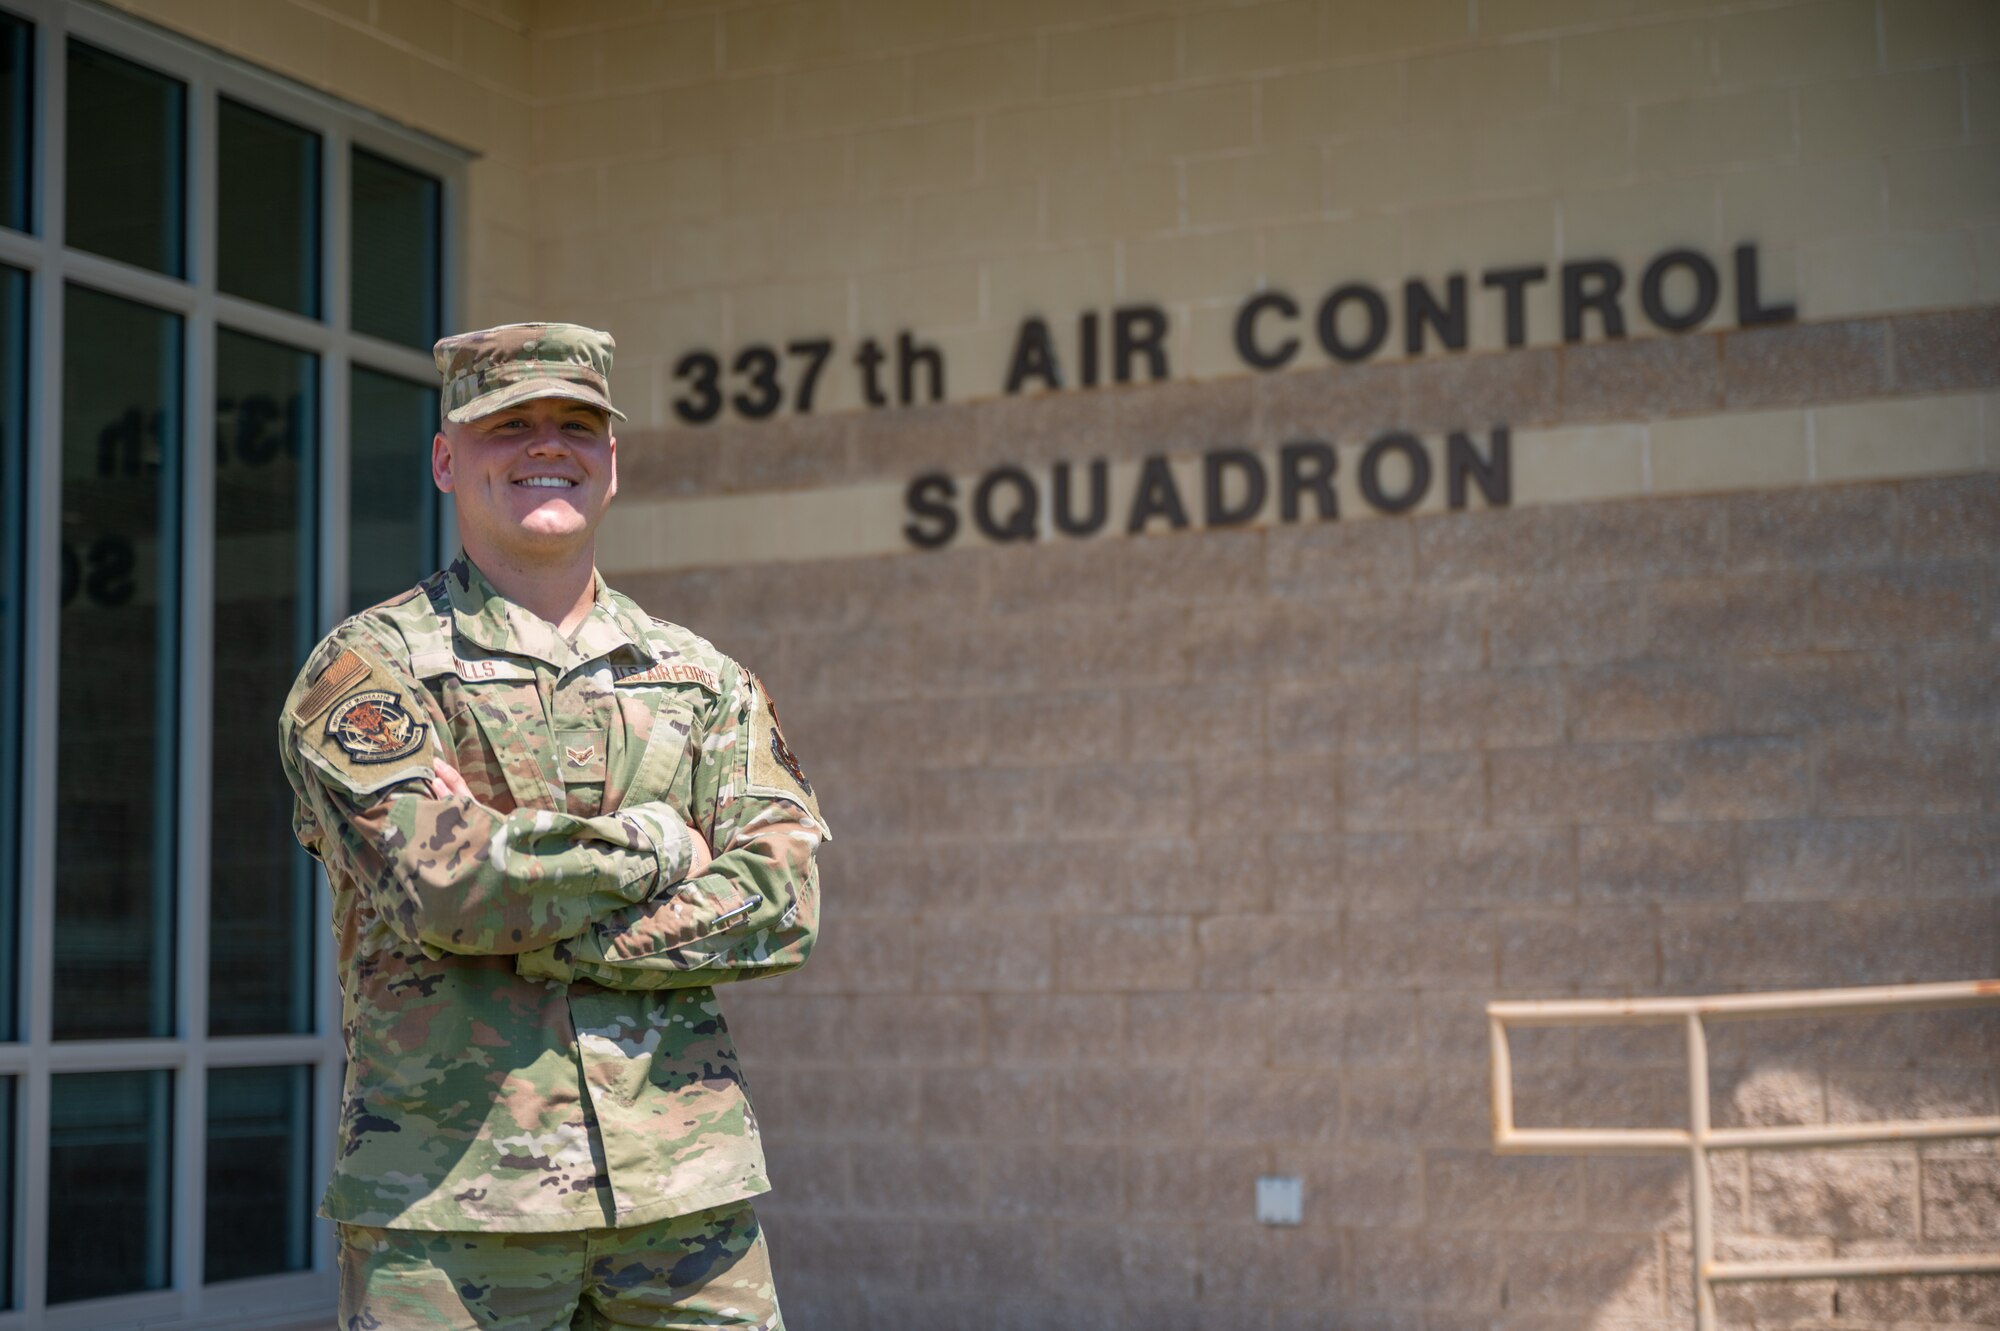 An Airman poses in front of a building for a photo.